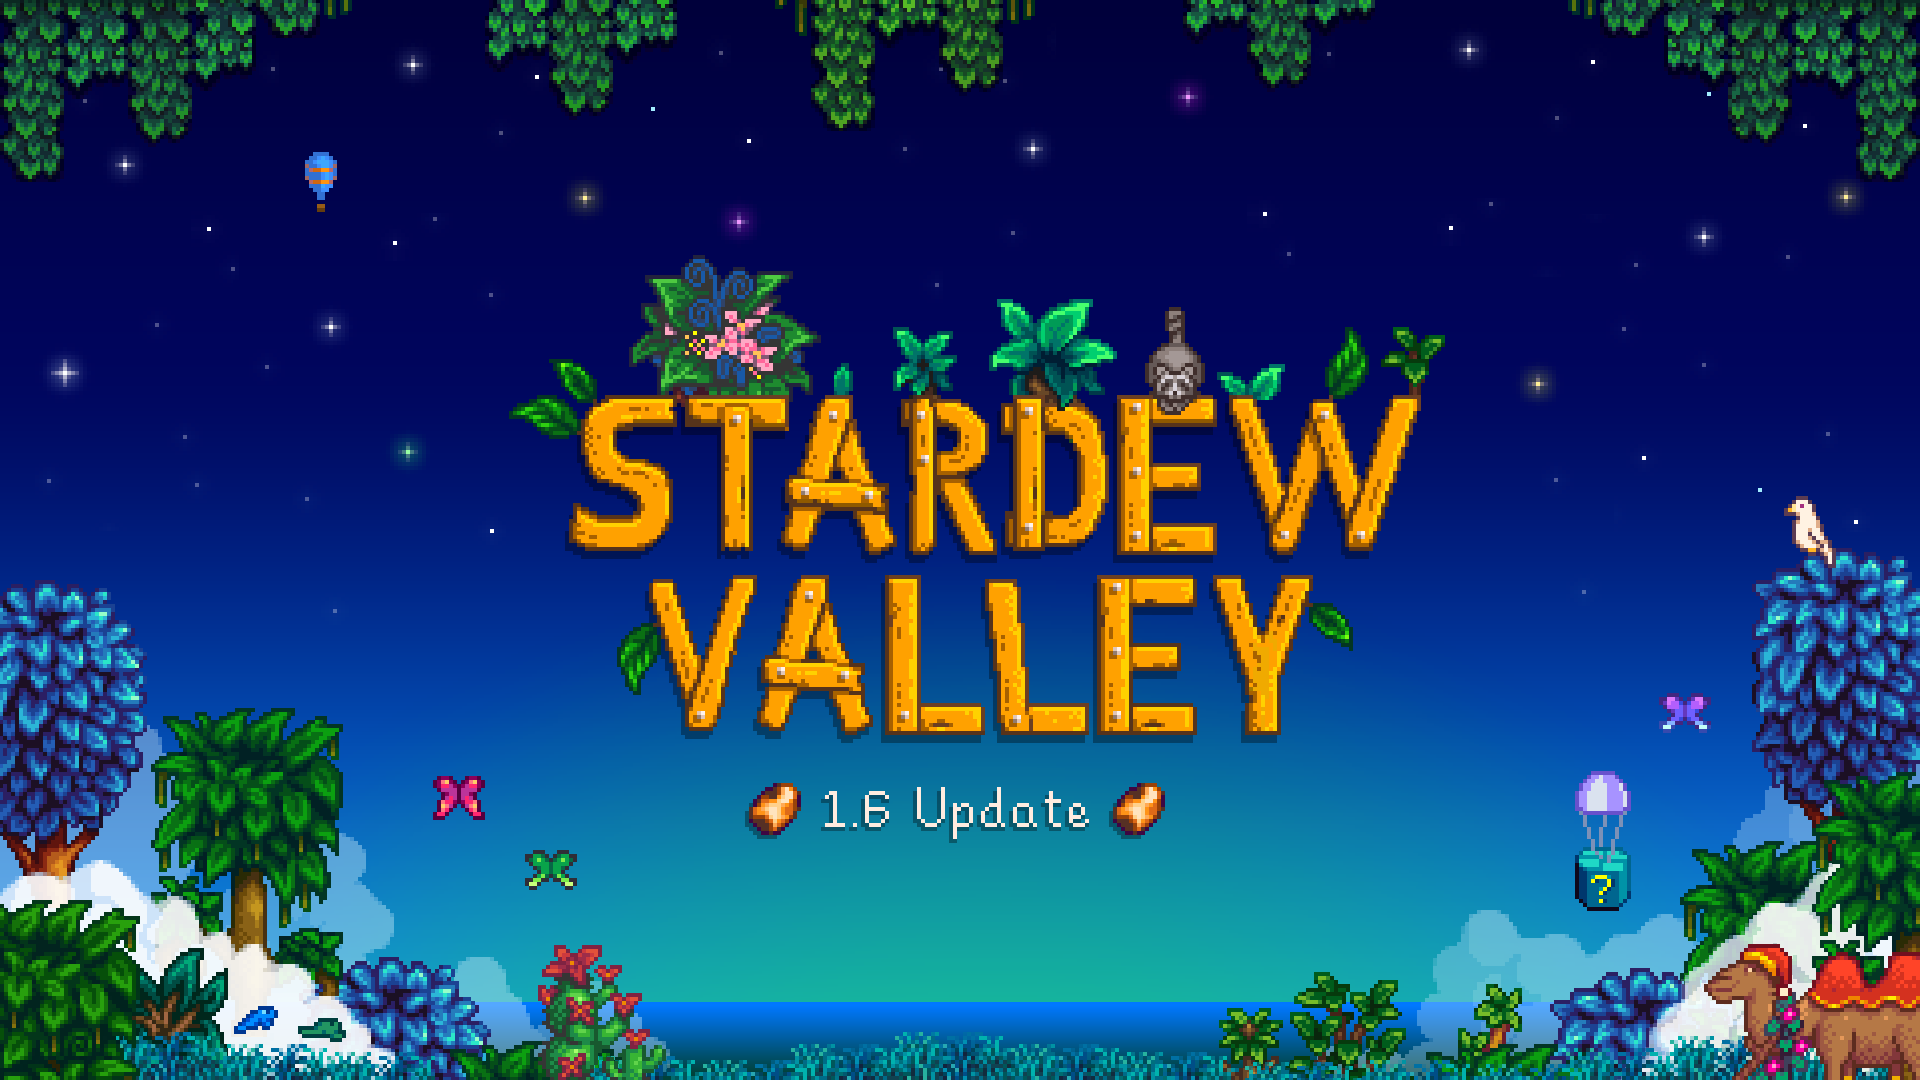 stardew-valley-1.6-update-download-full-patch-notes-history.png